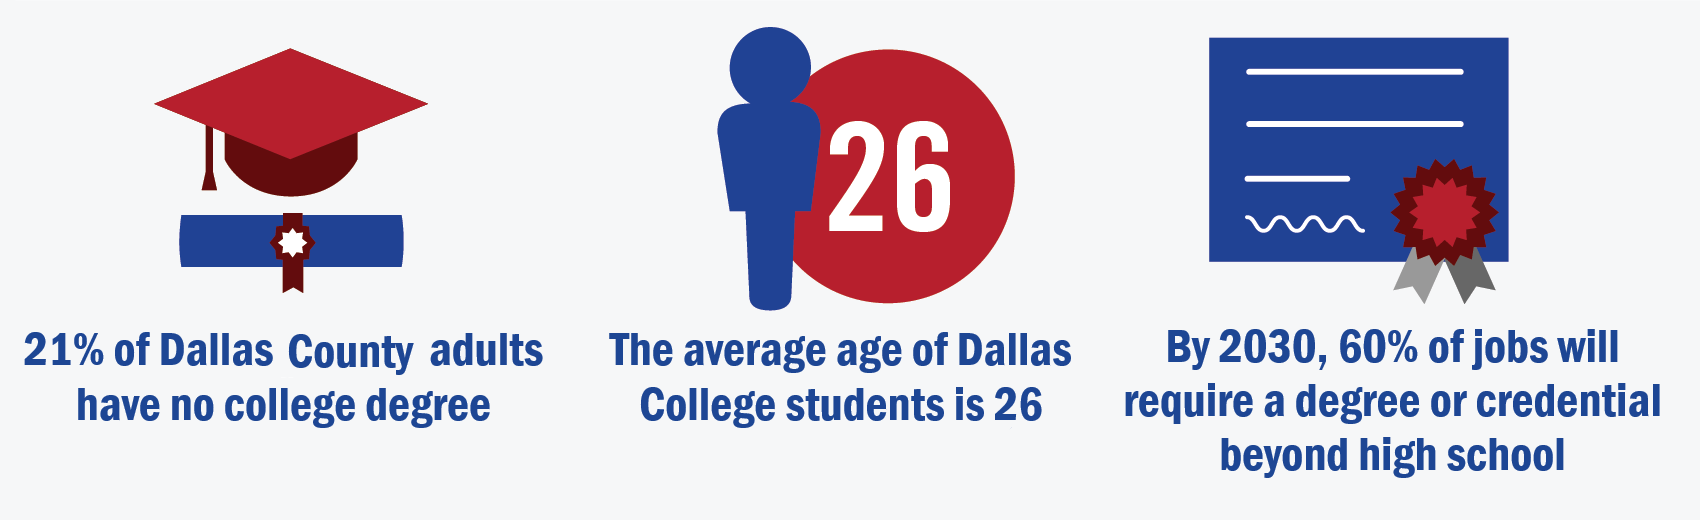 The average age of Dallas College students is 26; By 2030, 60% of jobs will require a degree or credential beyond high school